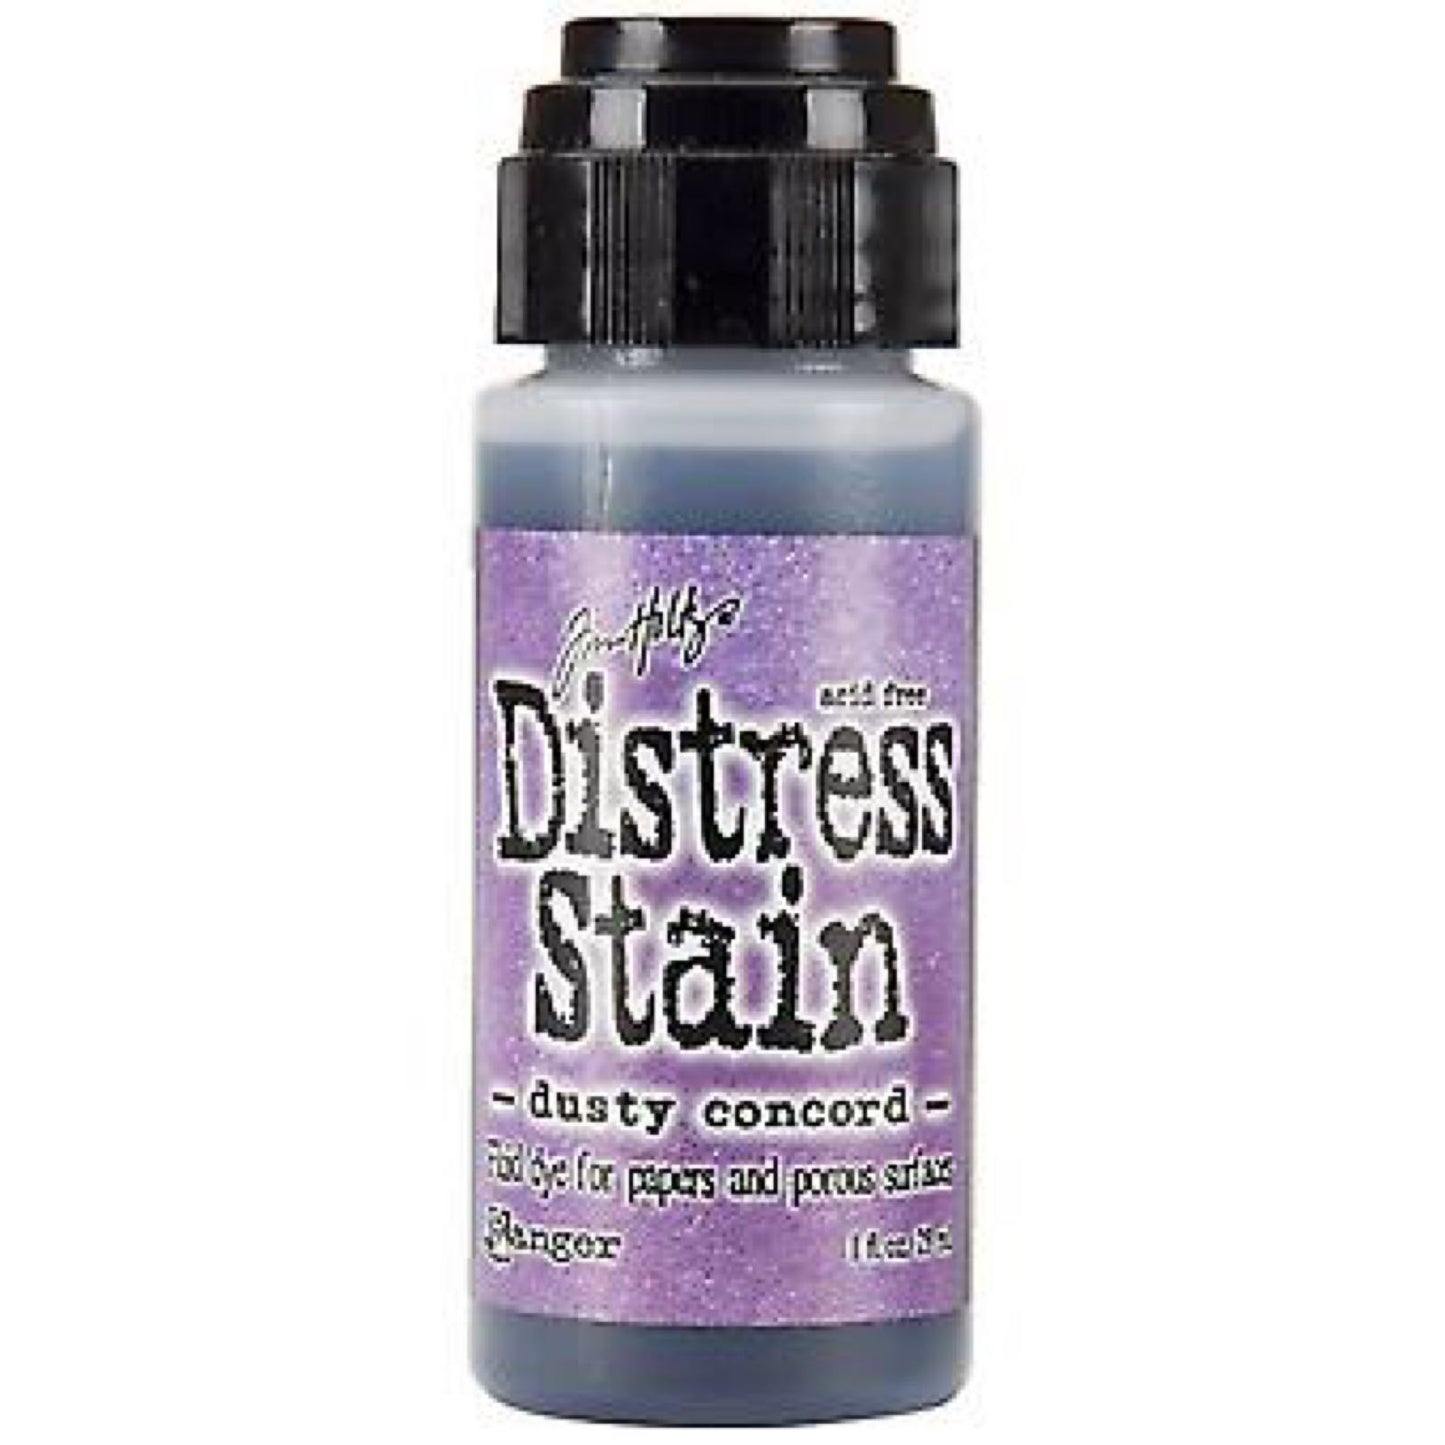 Distress stain  Dusty concord